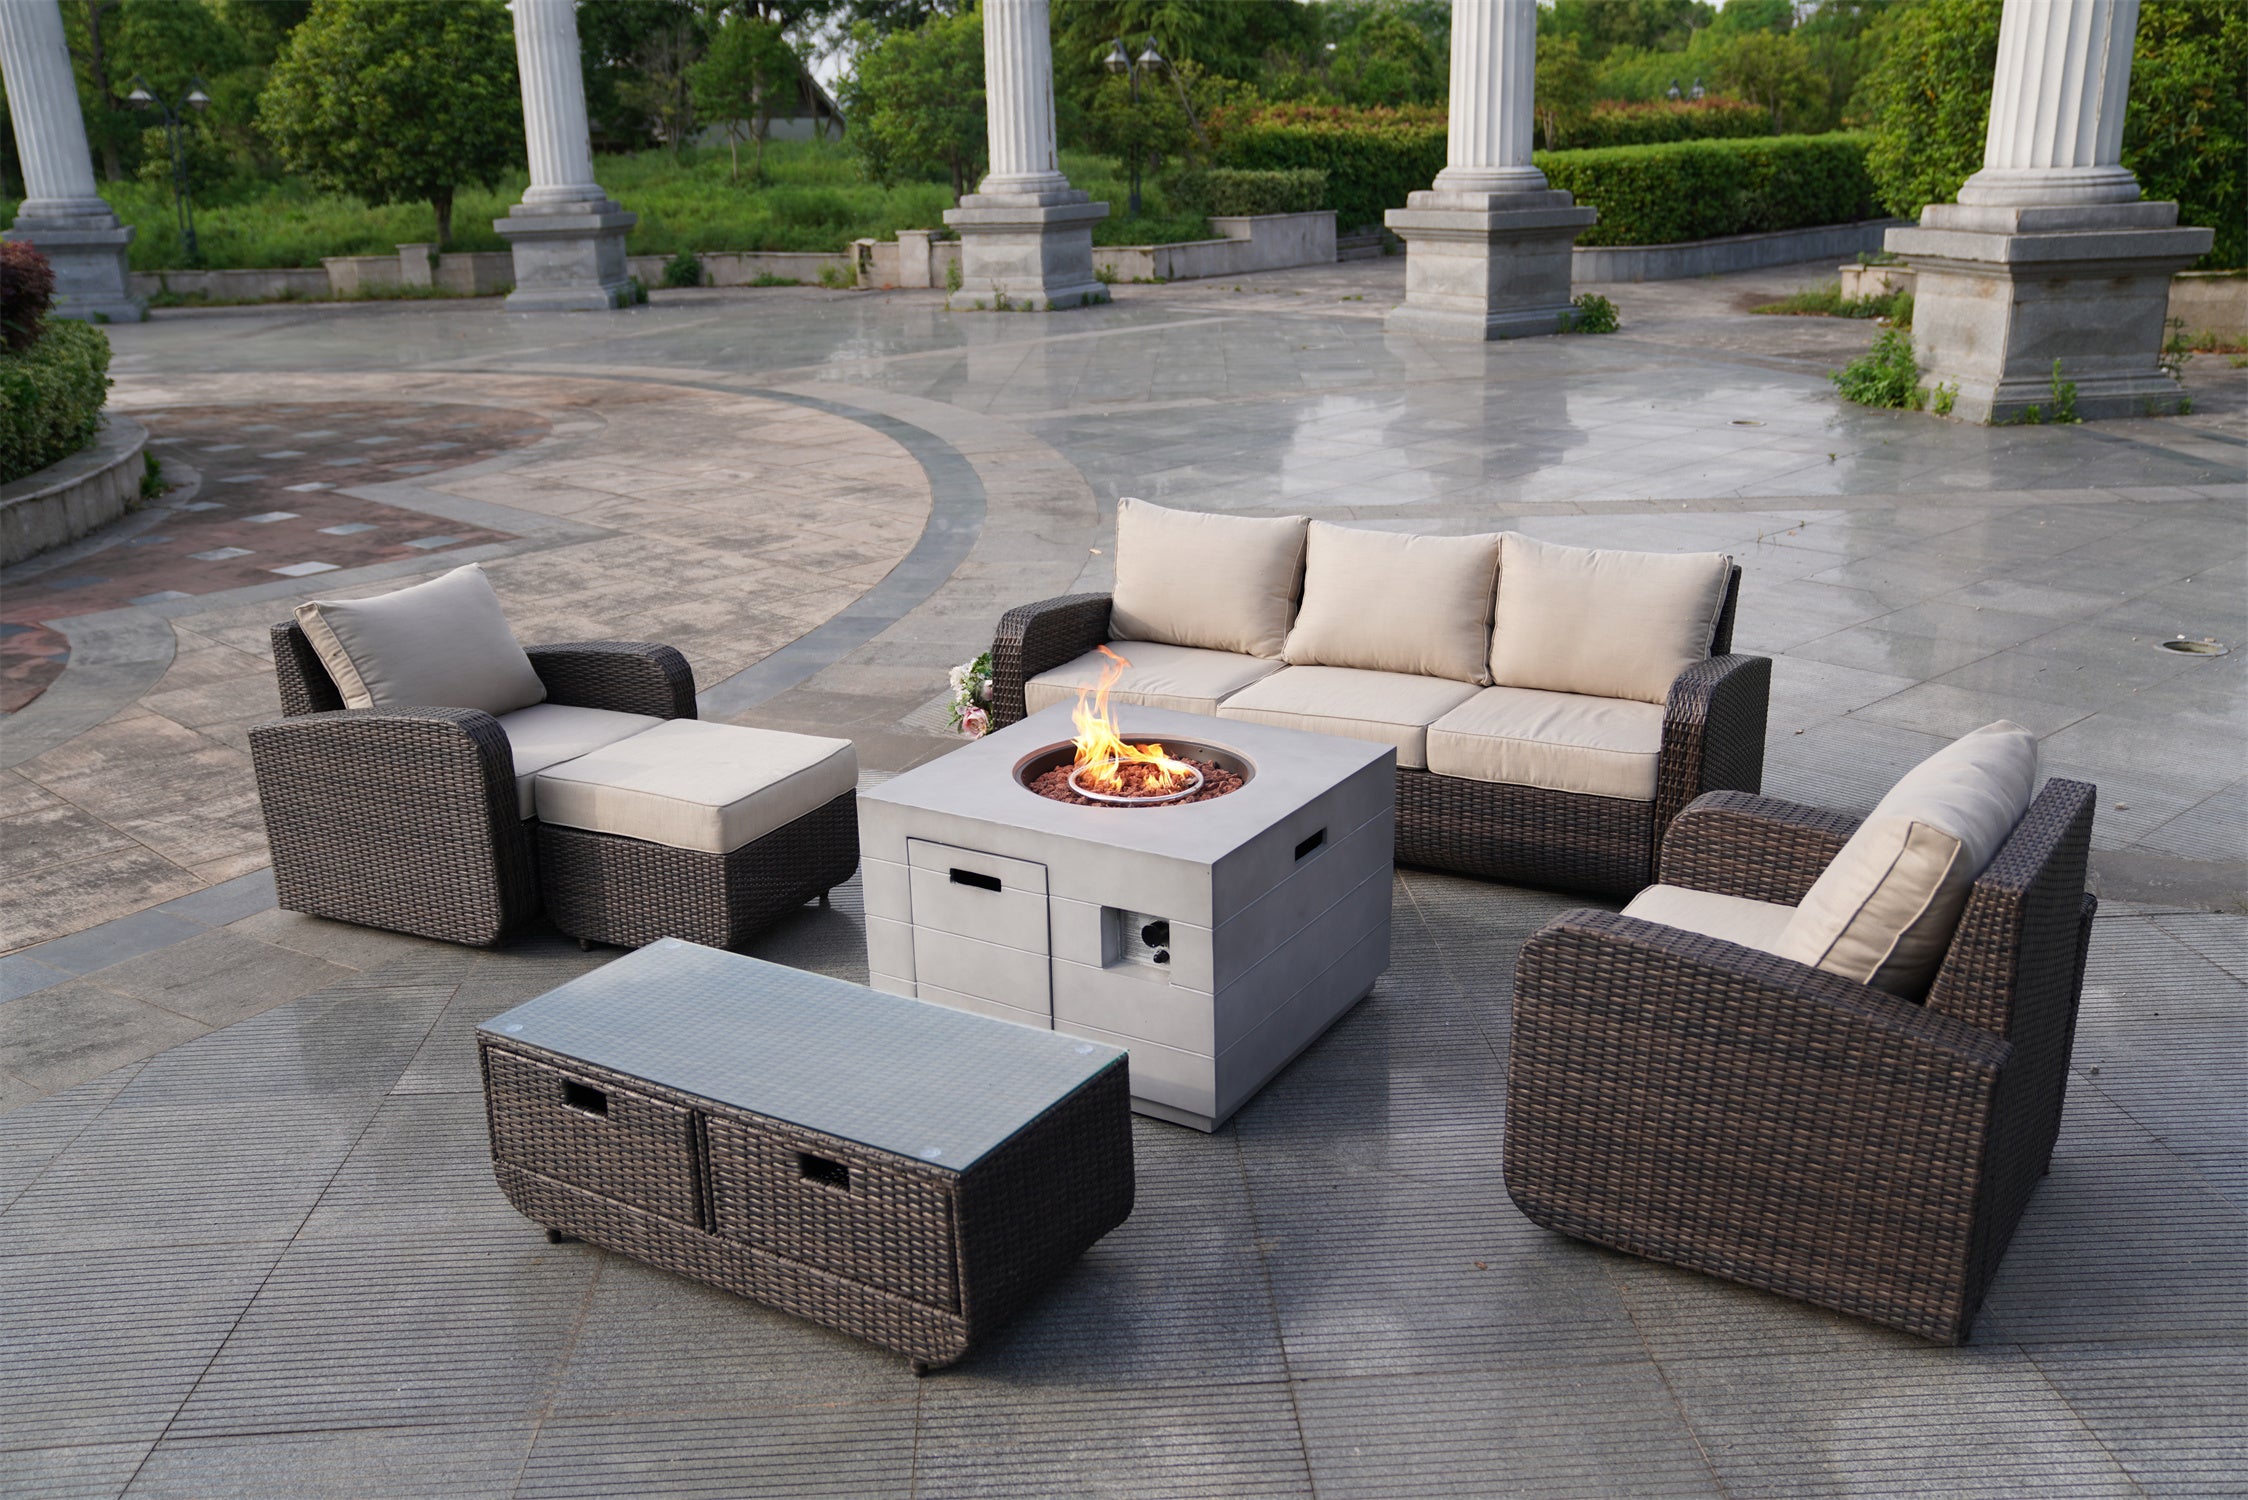 Abrihome Gray 5pc Patio Garden Furniture Sofa Set Sectional with Fire Table